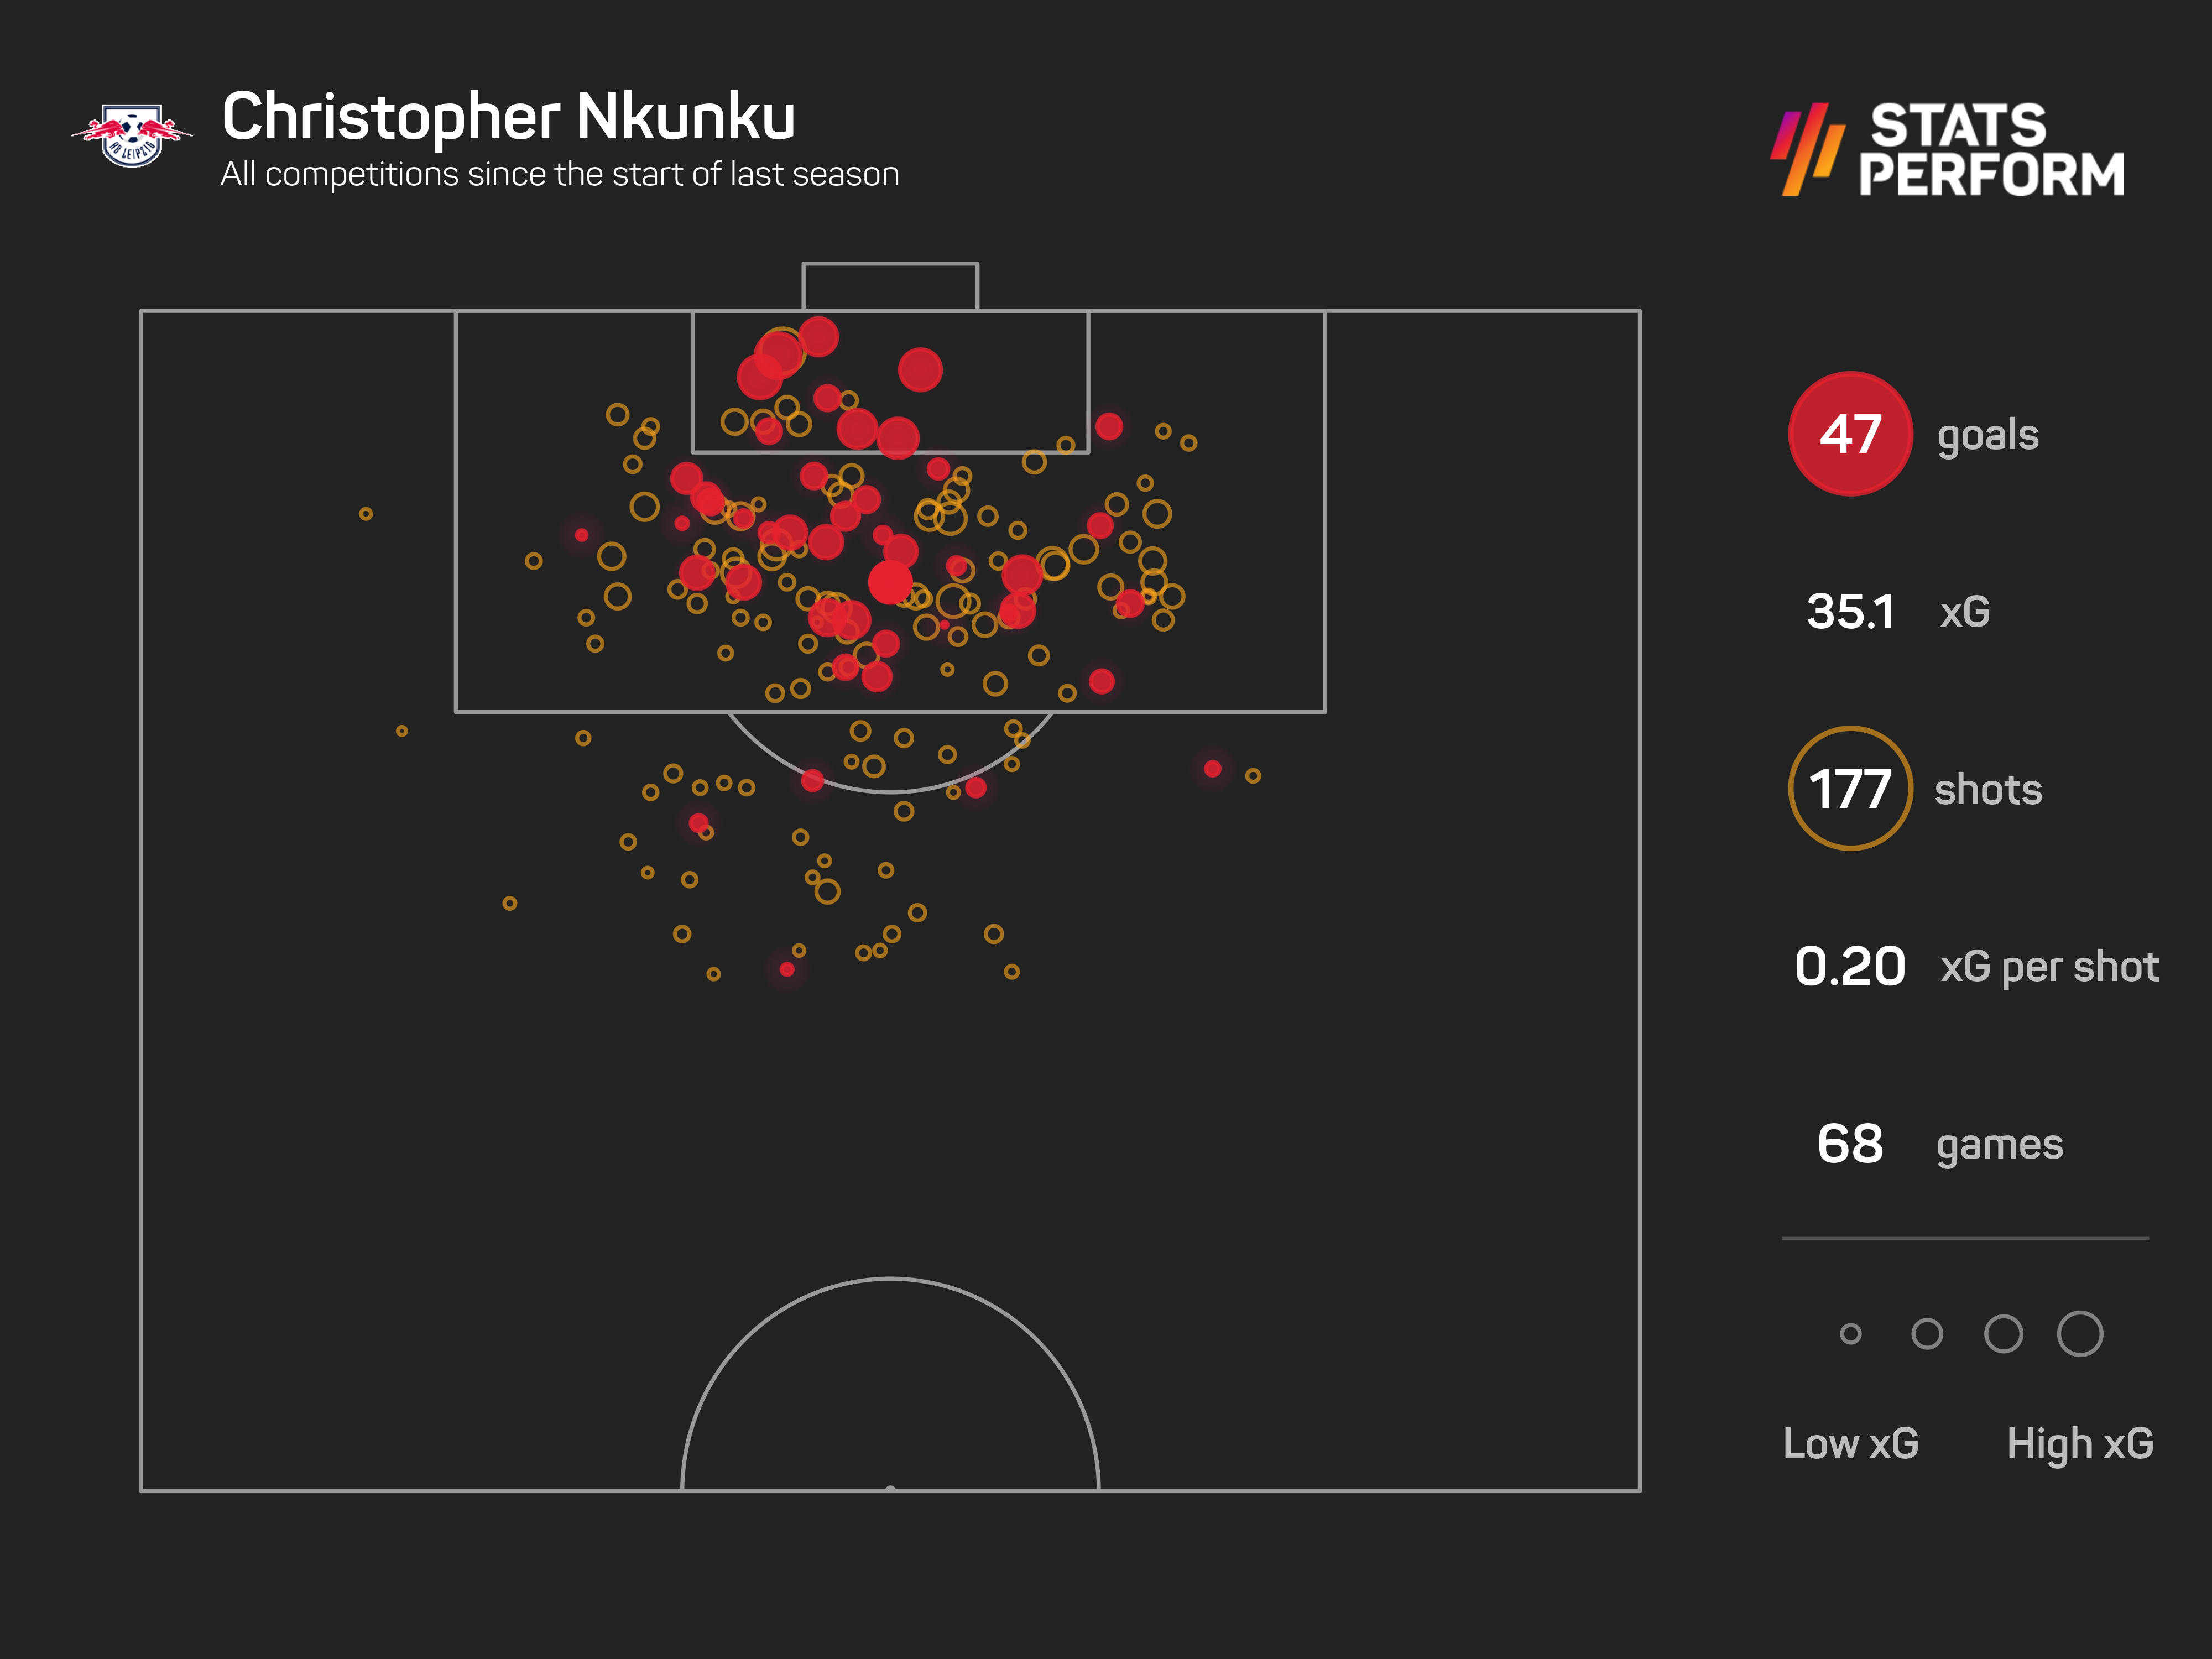 Christopher Nkunku has been one of Europe's best performers in the last 18 months